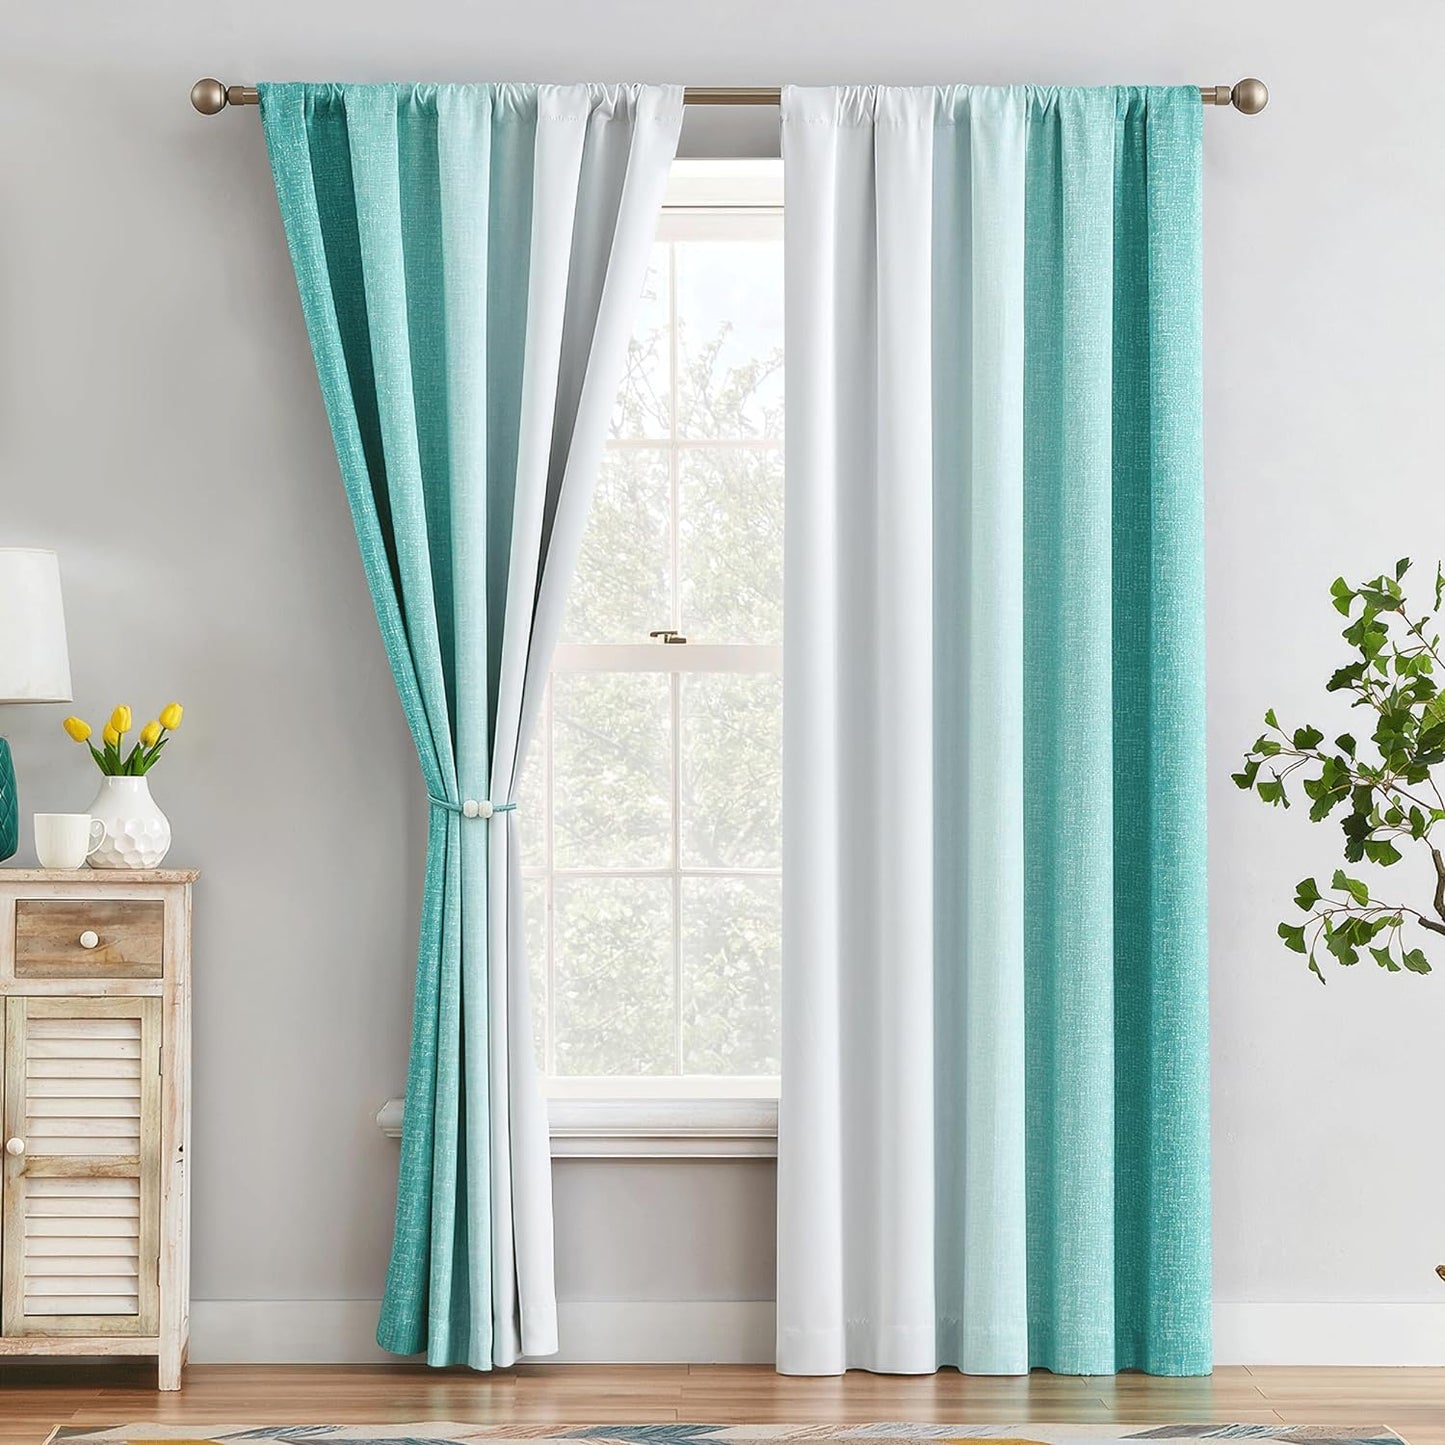 Geomoroccan Ombre 100% Blackout Curtains 84 Inches Long, Pink and White 2 Tone Reversible Window Treatments for Bedroom Living Room, Linen Gradient Print Rod Pocket Drapes 52" W 2 Panel Sets  Geomoroccan Teal 52"X95"X2 